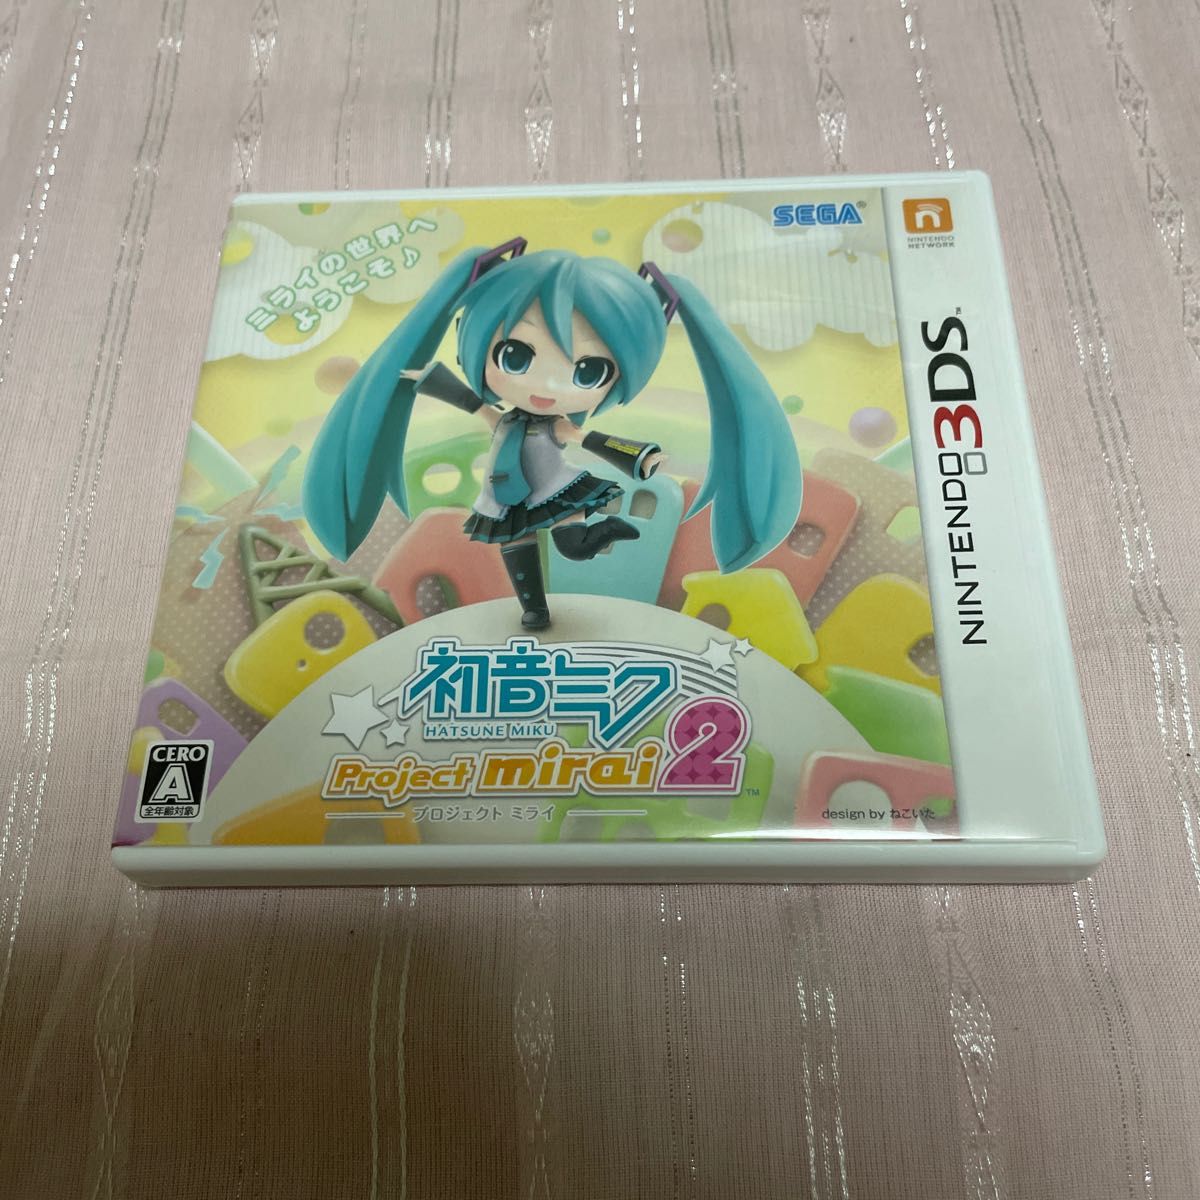 【3DS】 初音ミク Project mirai 2 [通常版］　ソフト　カード付き